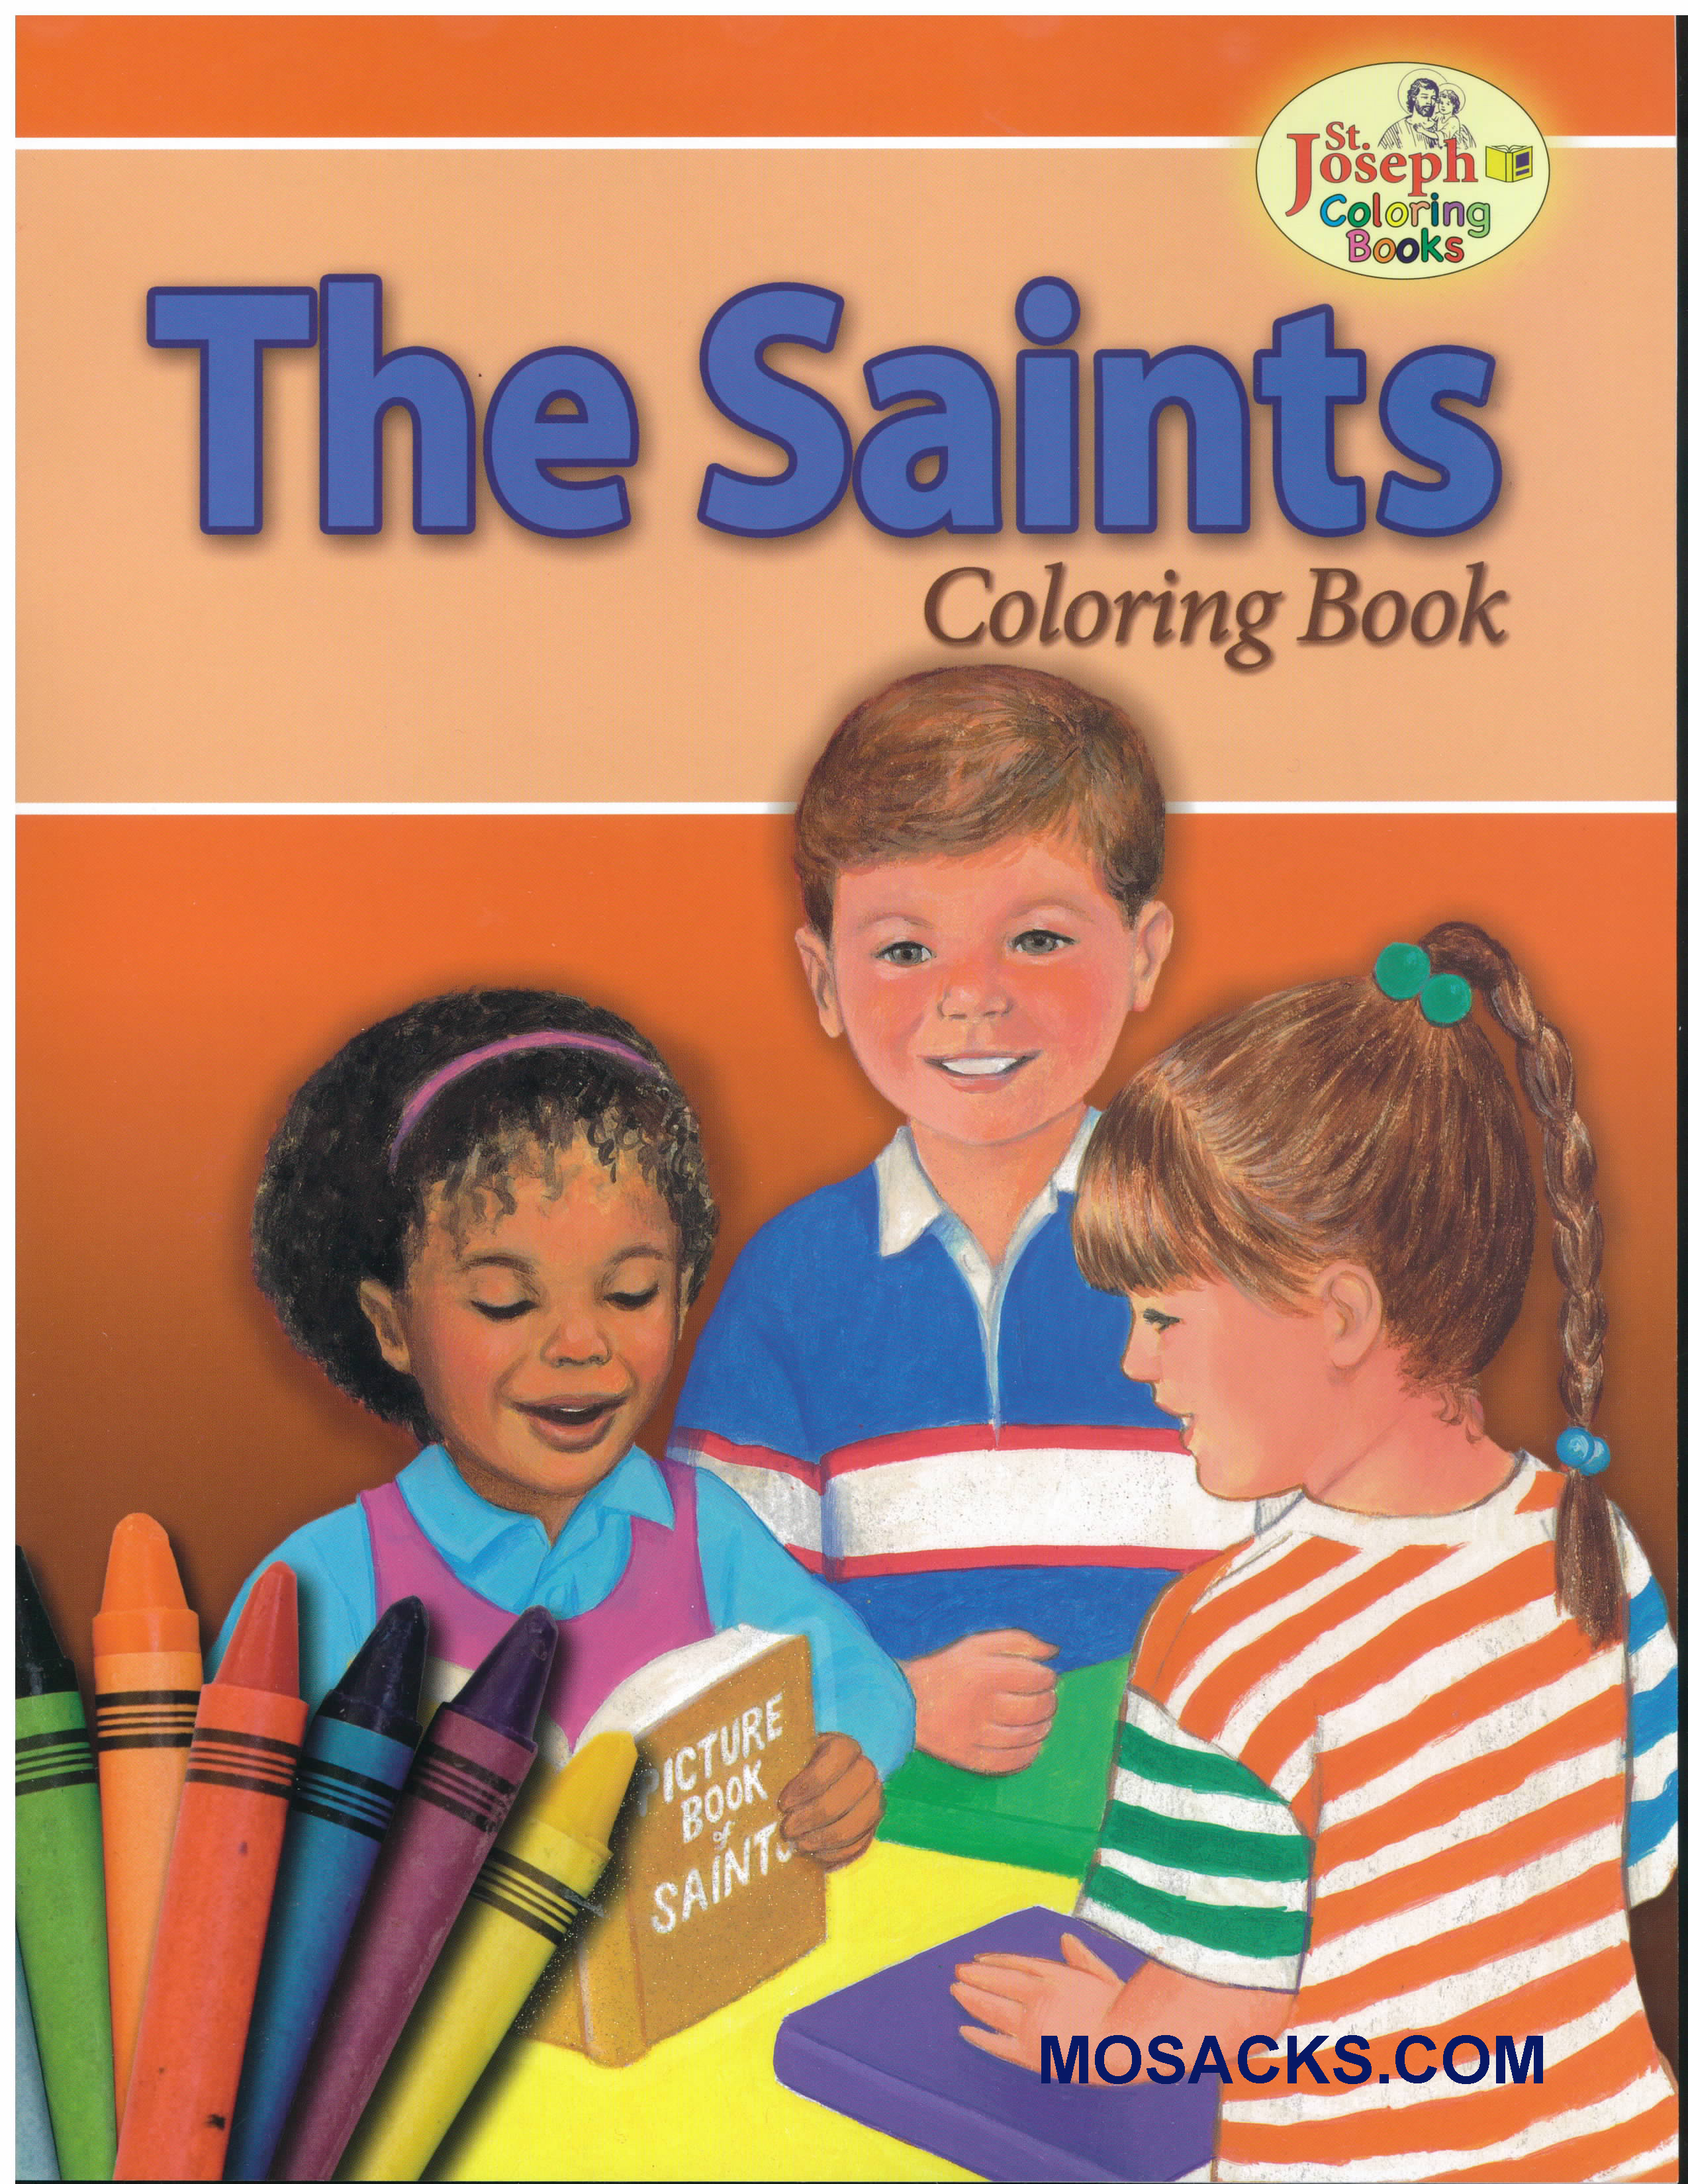 Coloring Book About The Saints-978089942681-5